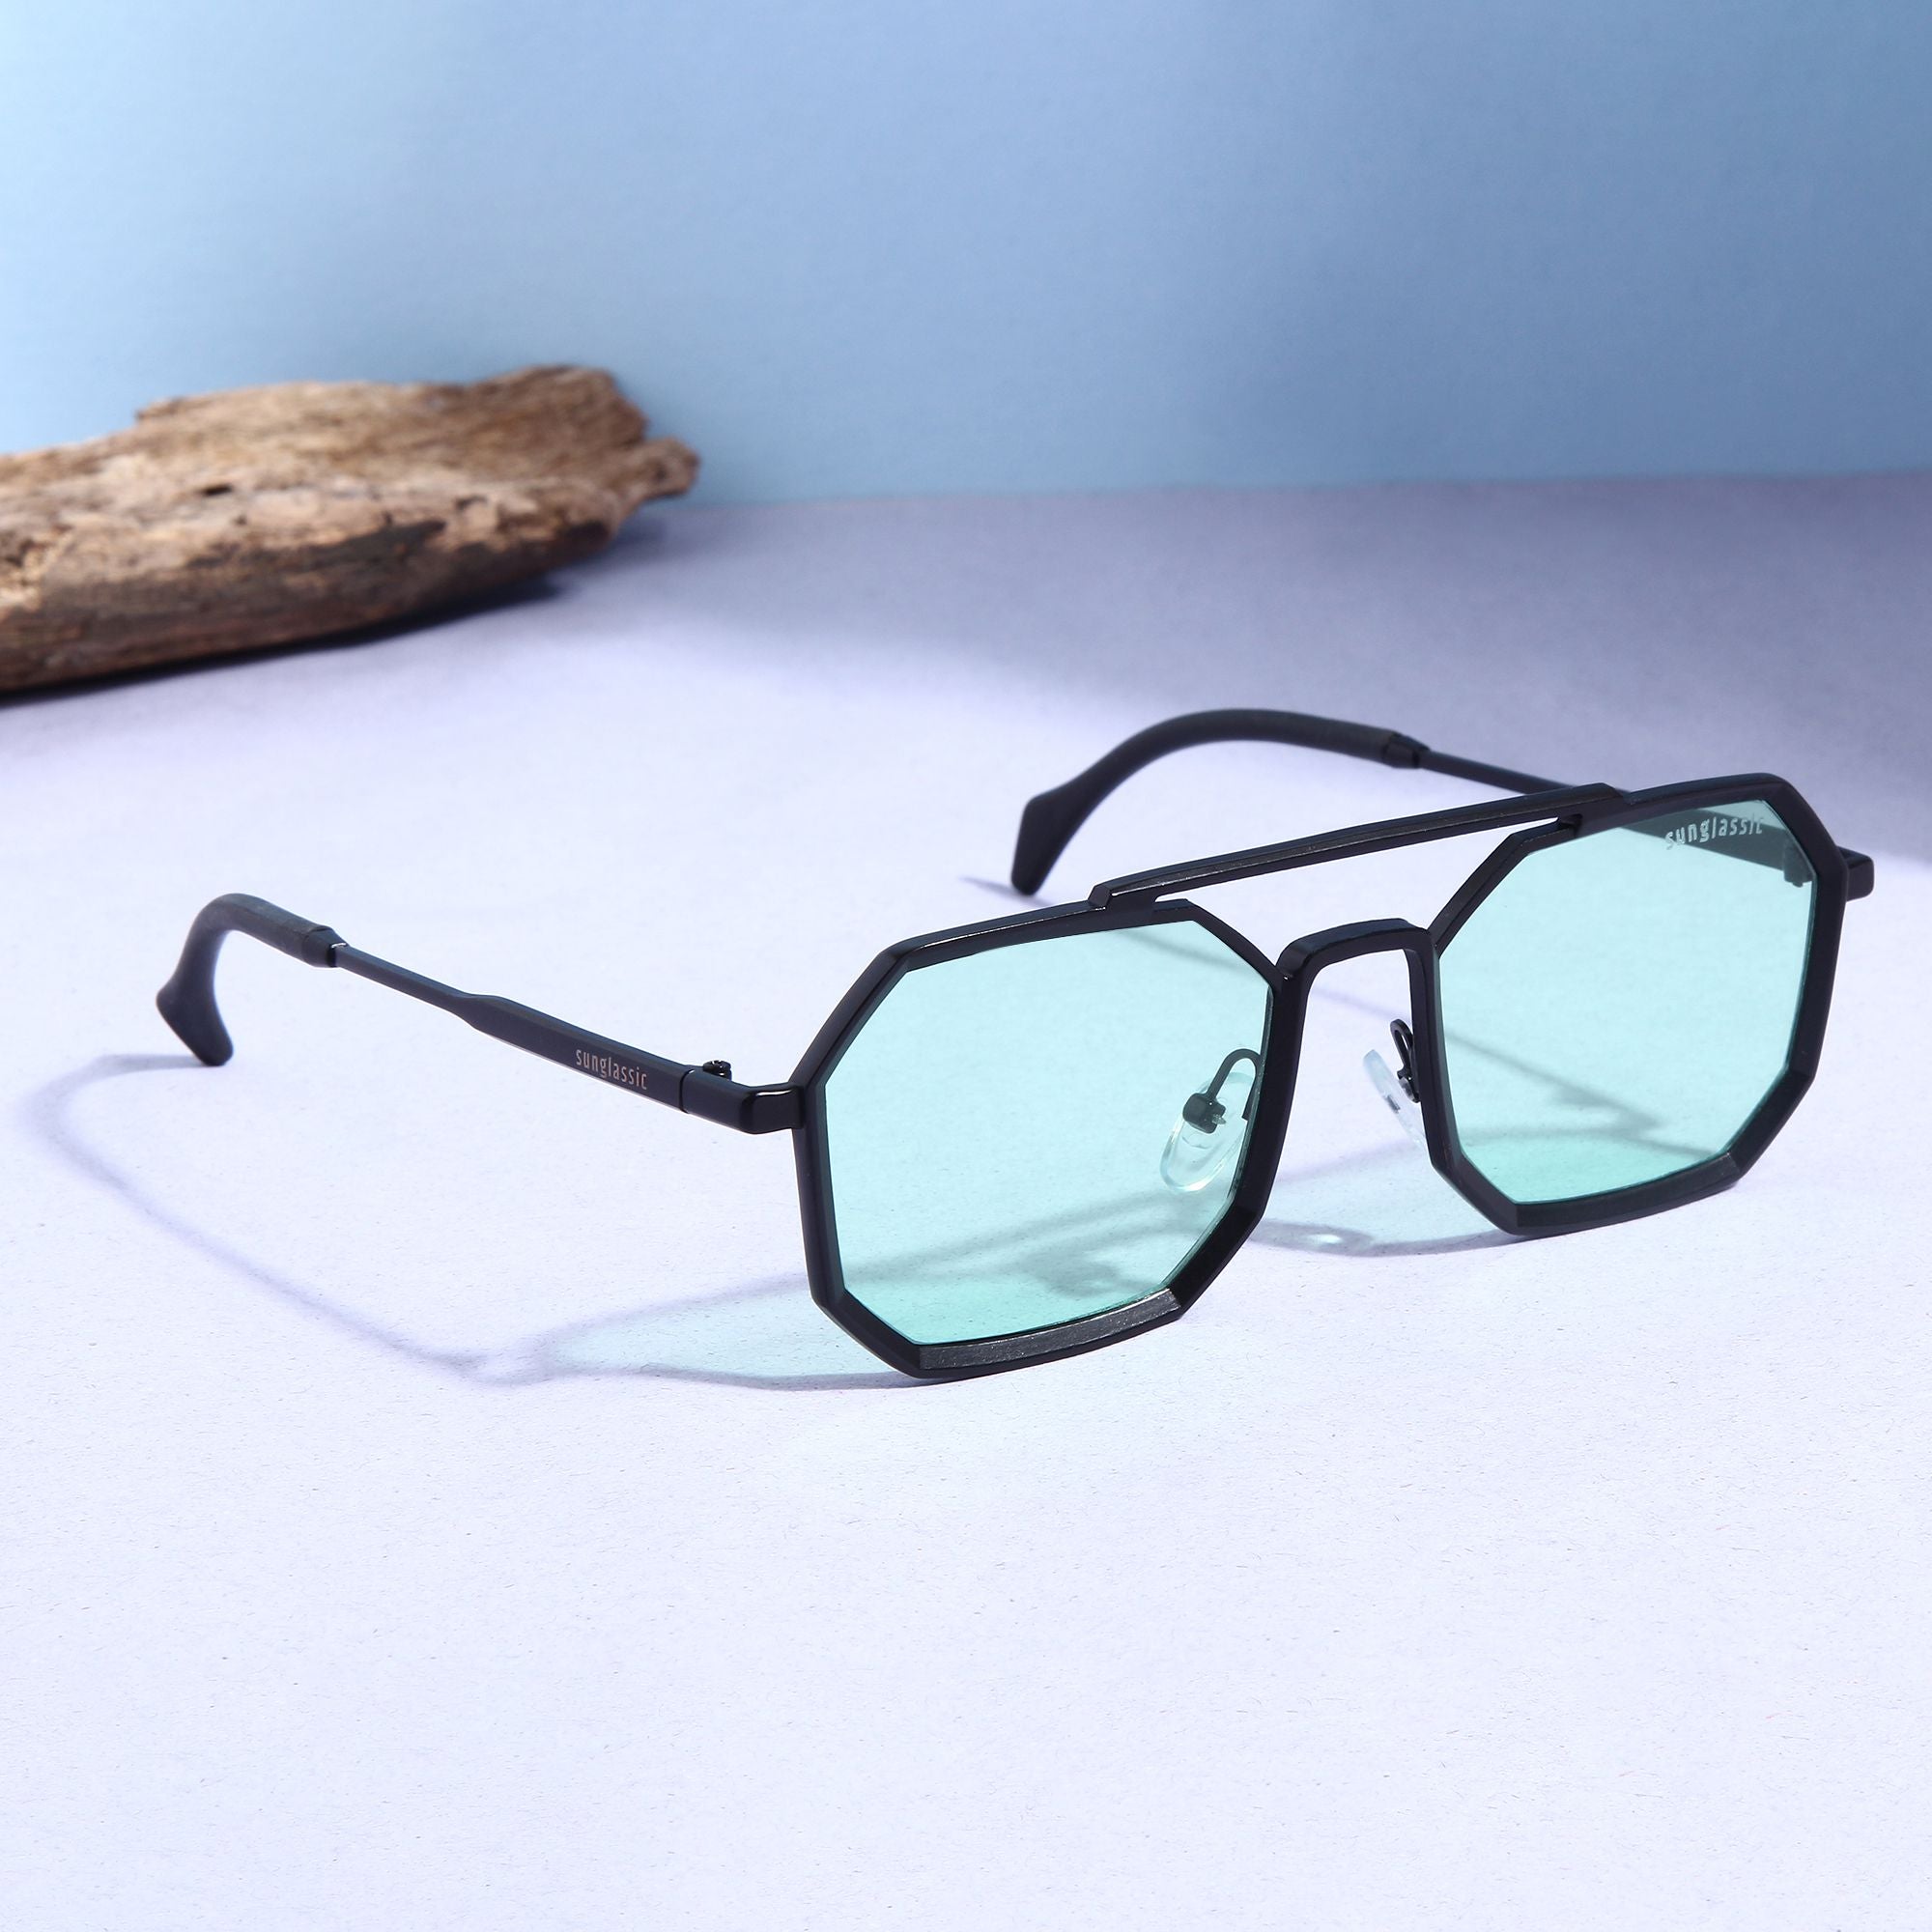 Sunglasses with a stylish octagonal shape and green lenses.